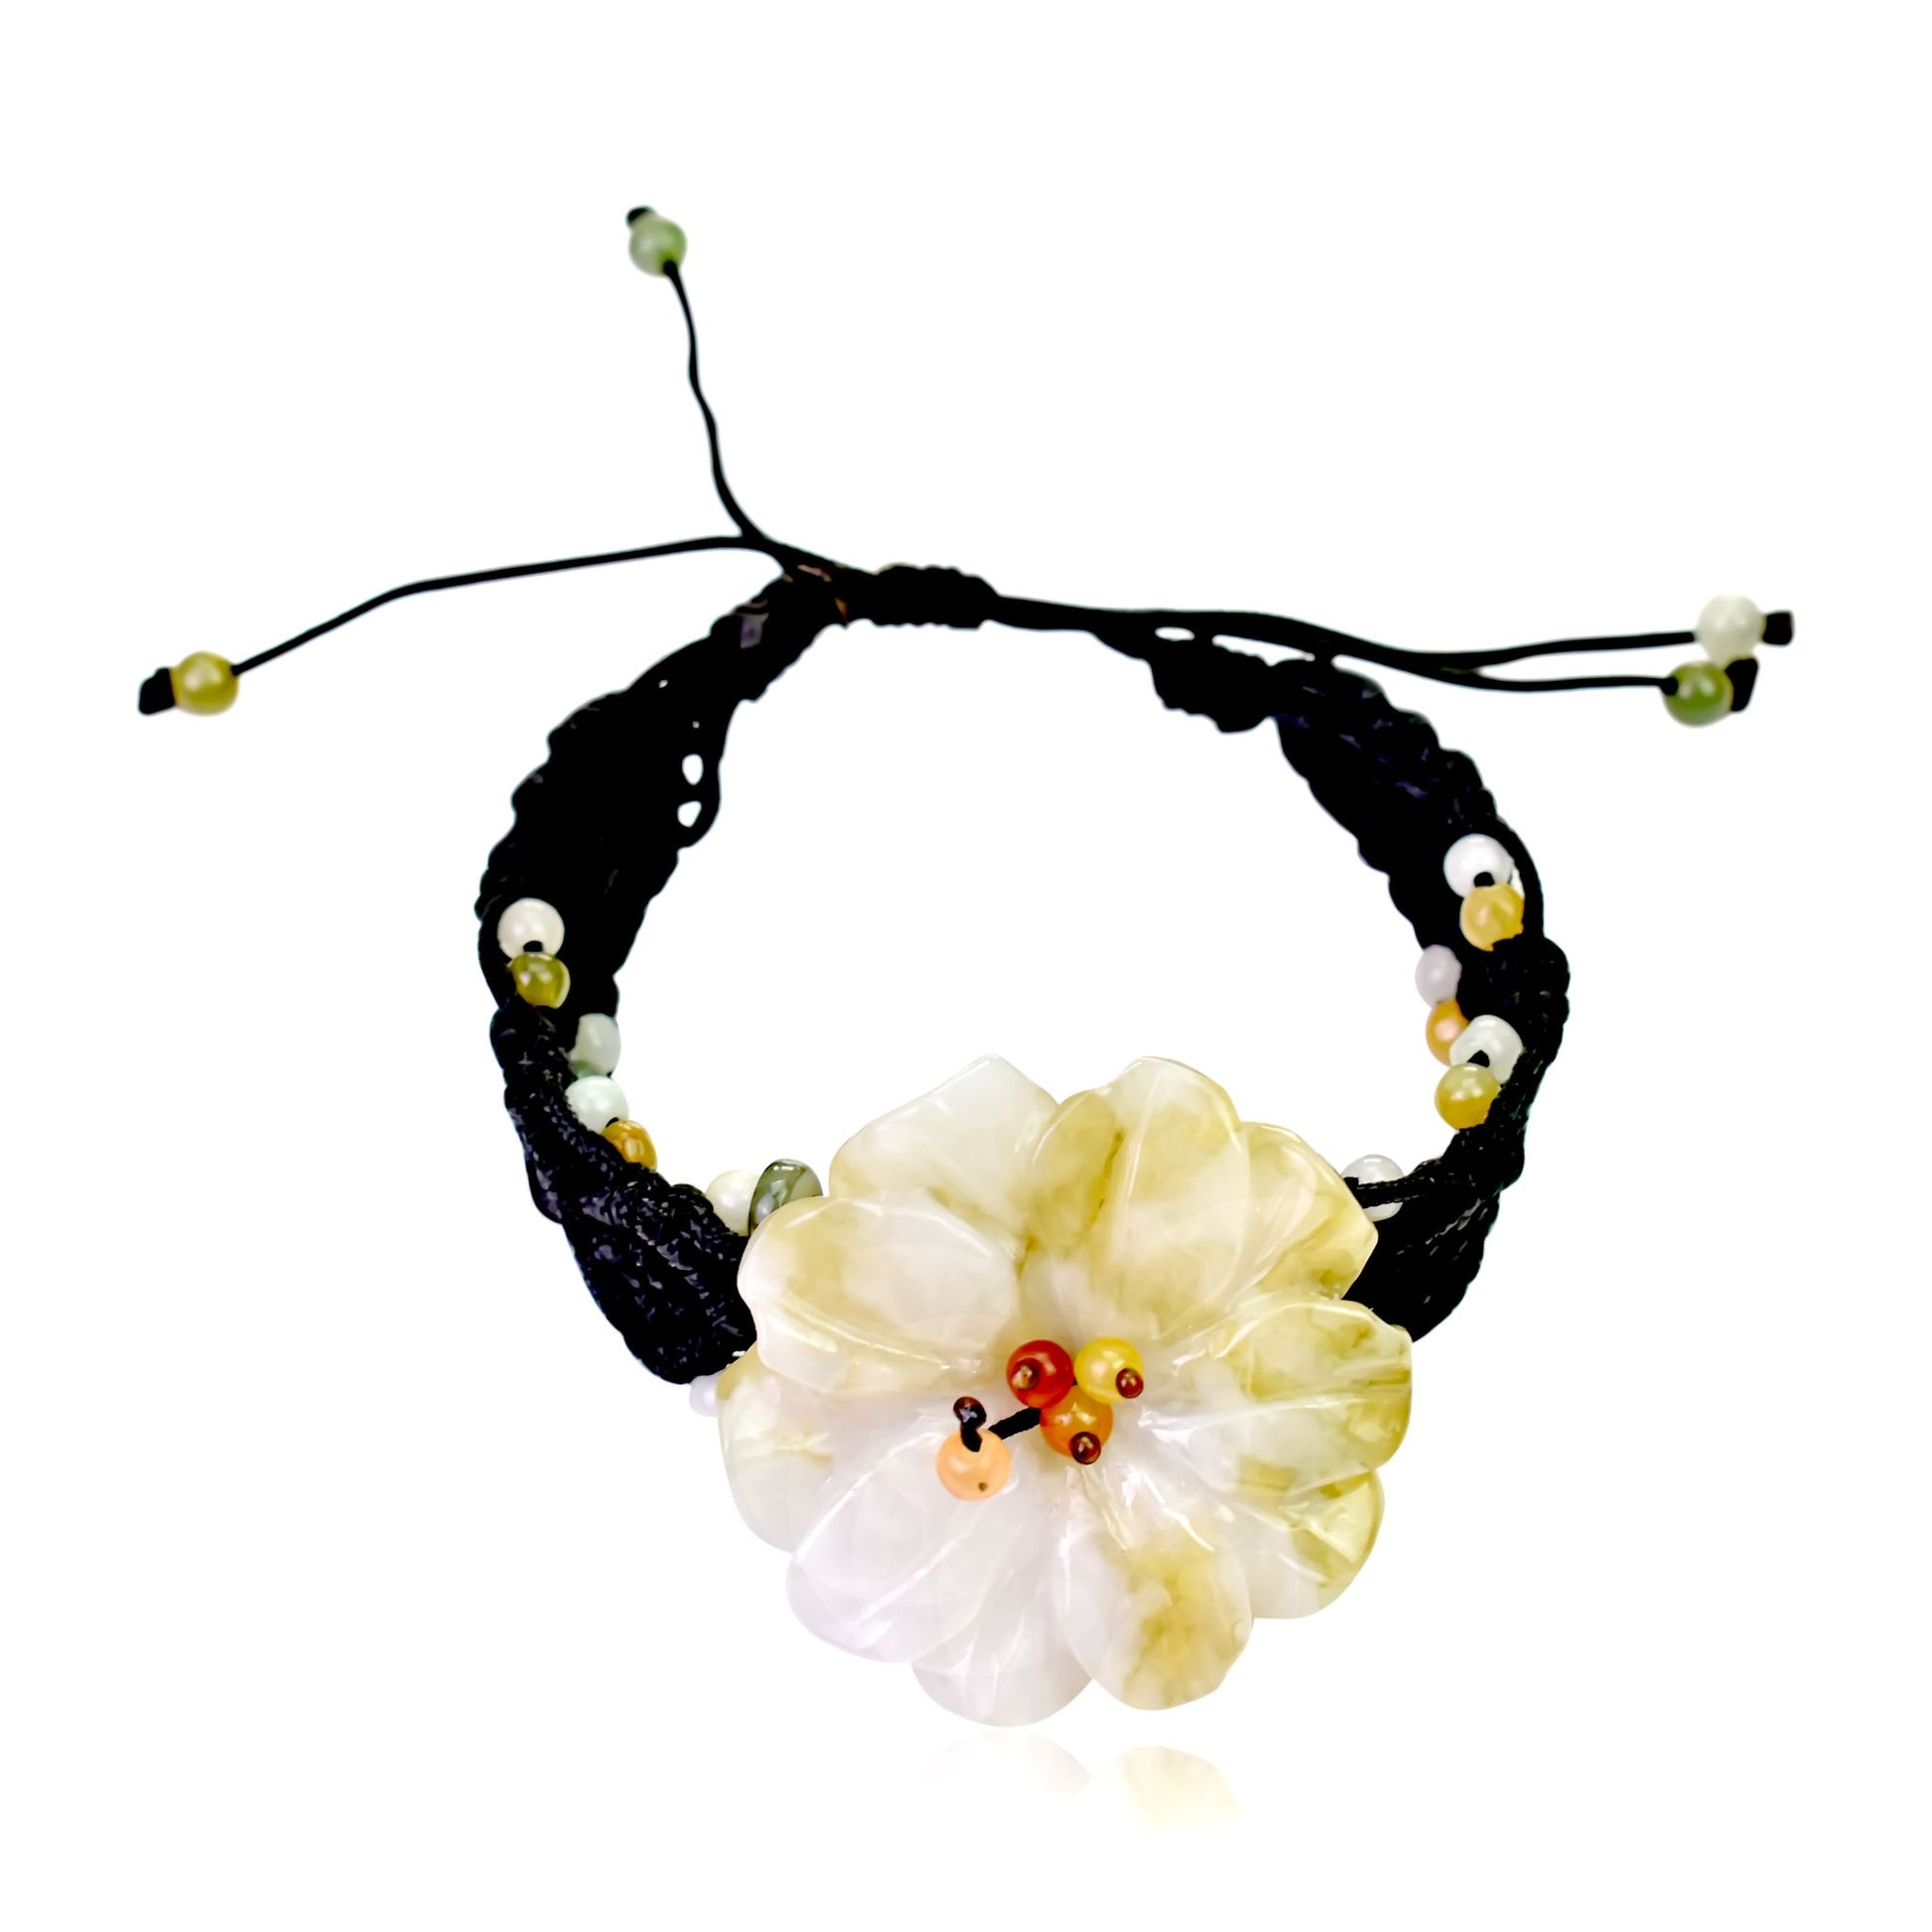 Show your Love of the Sea with Anemone Flower Bracelet made with Black Cord